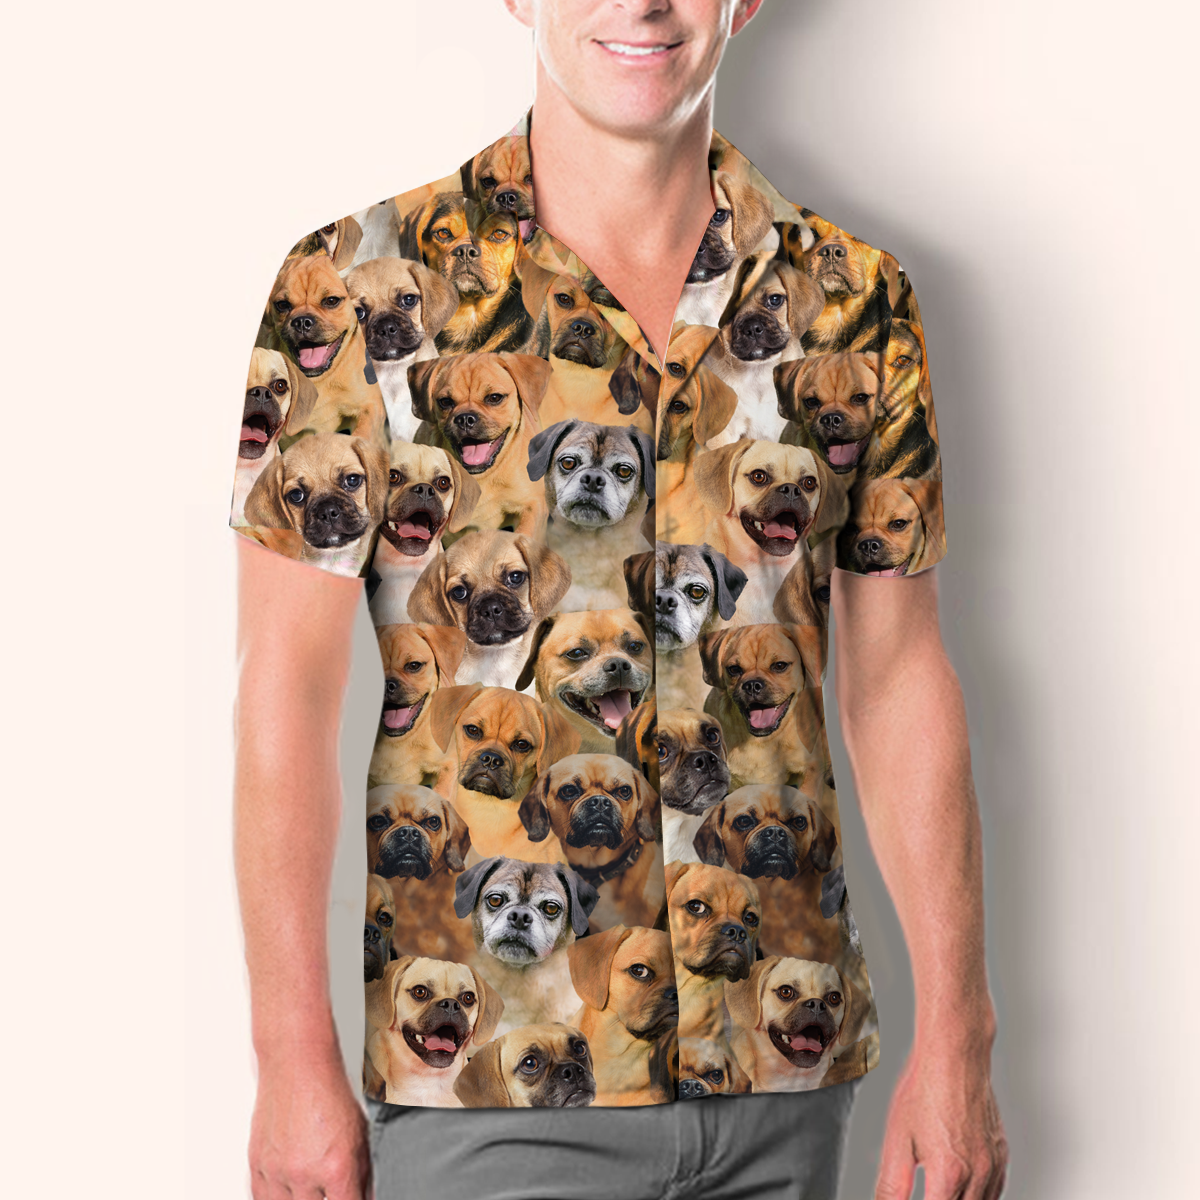 You Will Have A Bunch Of Puggles - Shirt V1